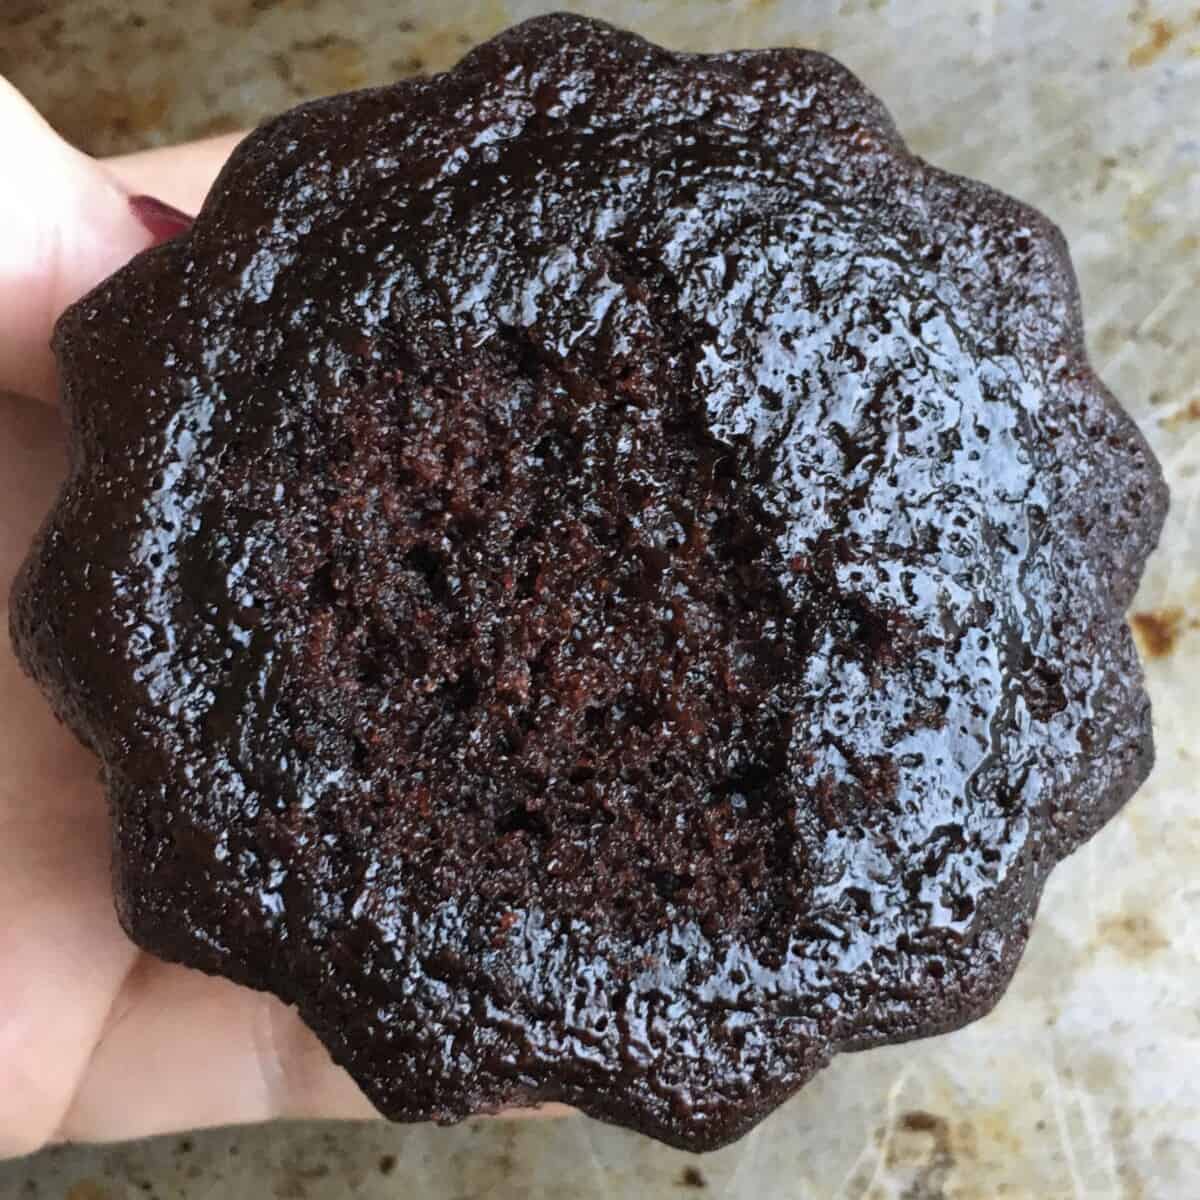 a mini devil's food cake bundt cake showing the bottom and how moist it is with a slight sheen and part of the inner crumb revealed when I pulled it off of the parchment paper and the bottom stuck. It's SO moist it's incredible.